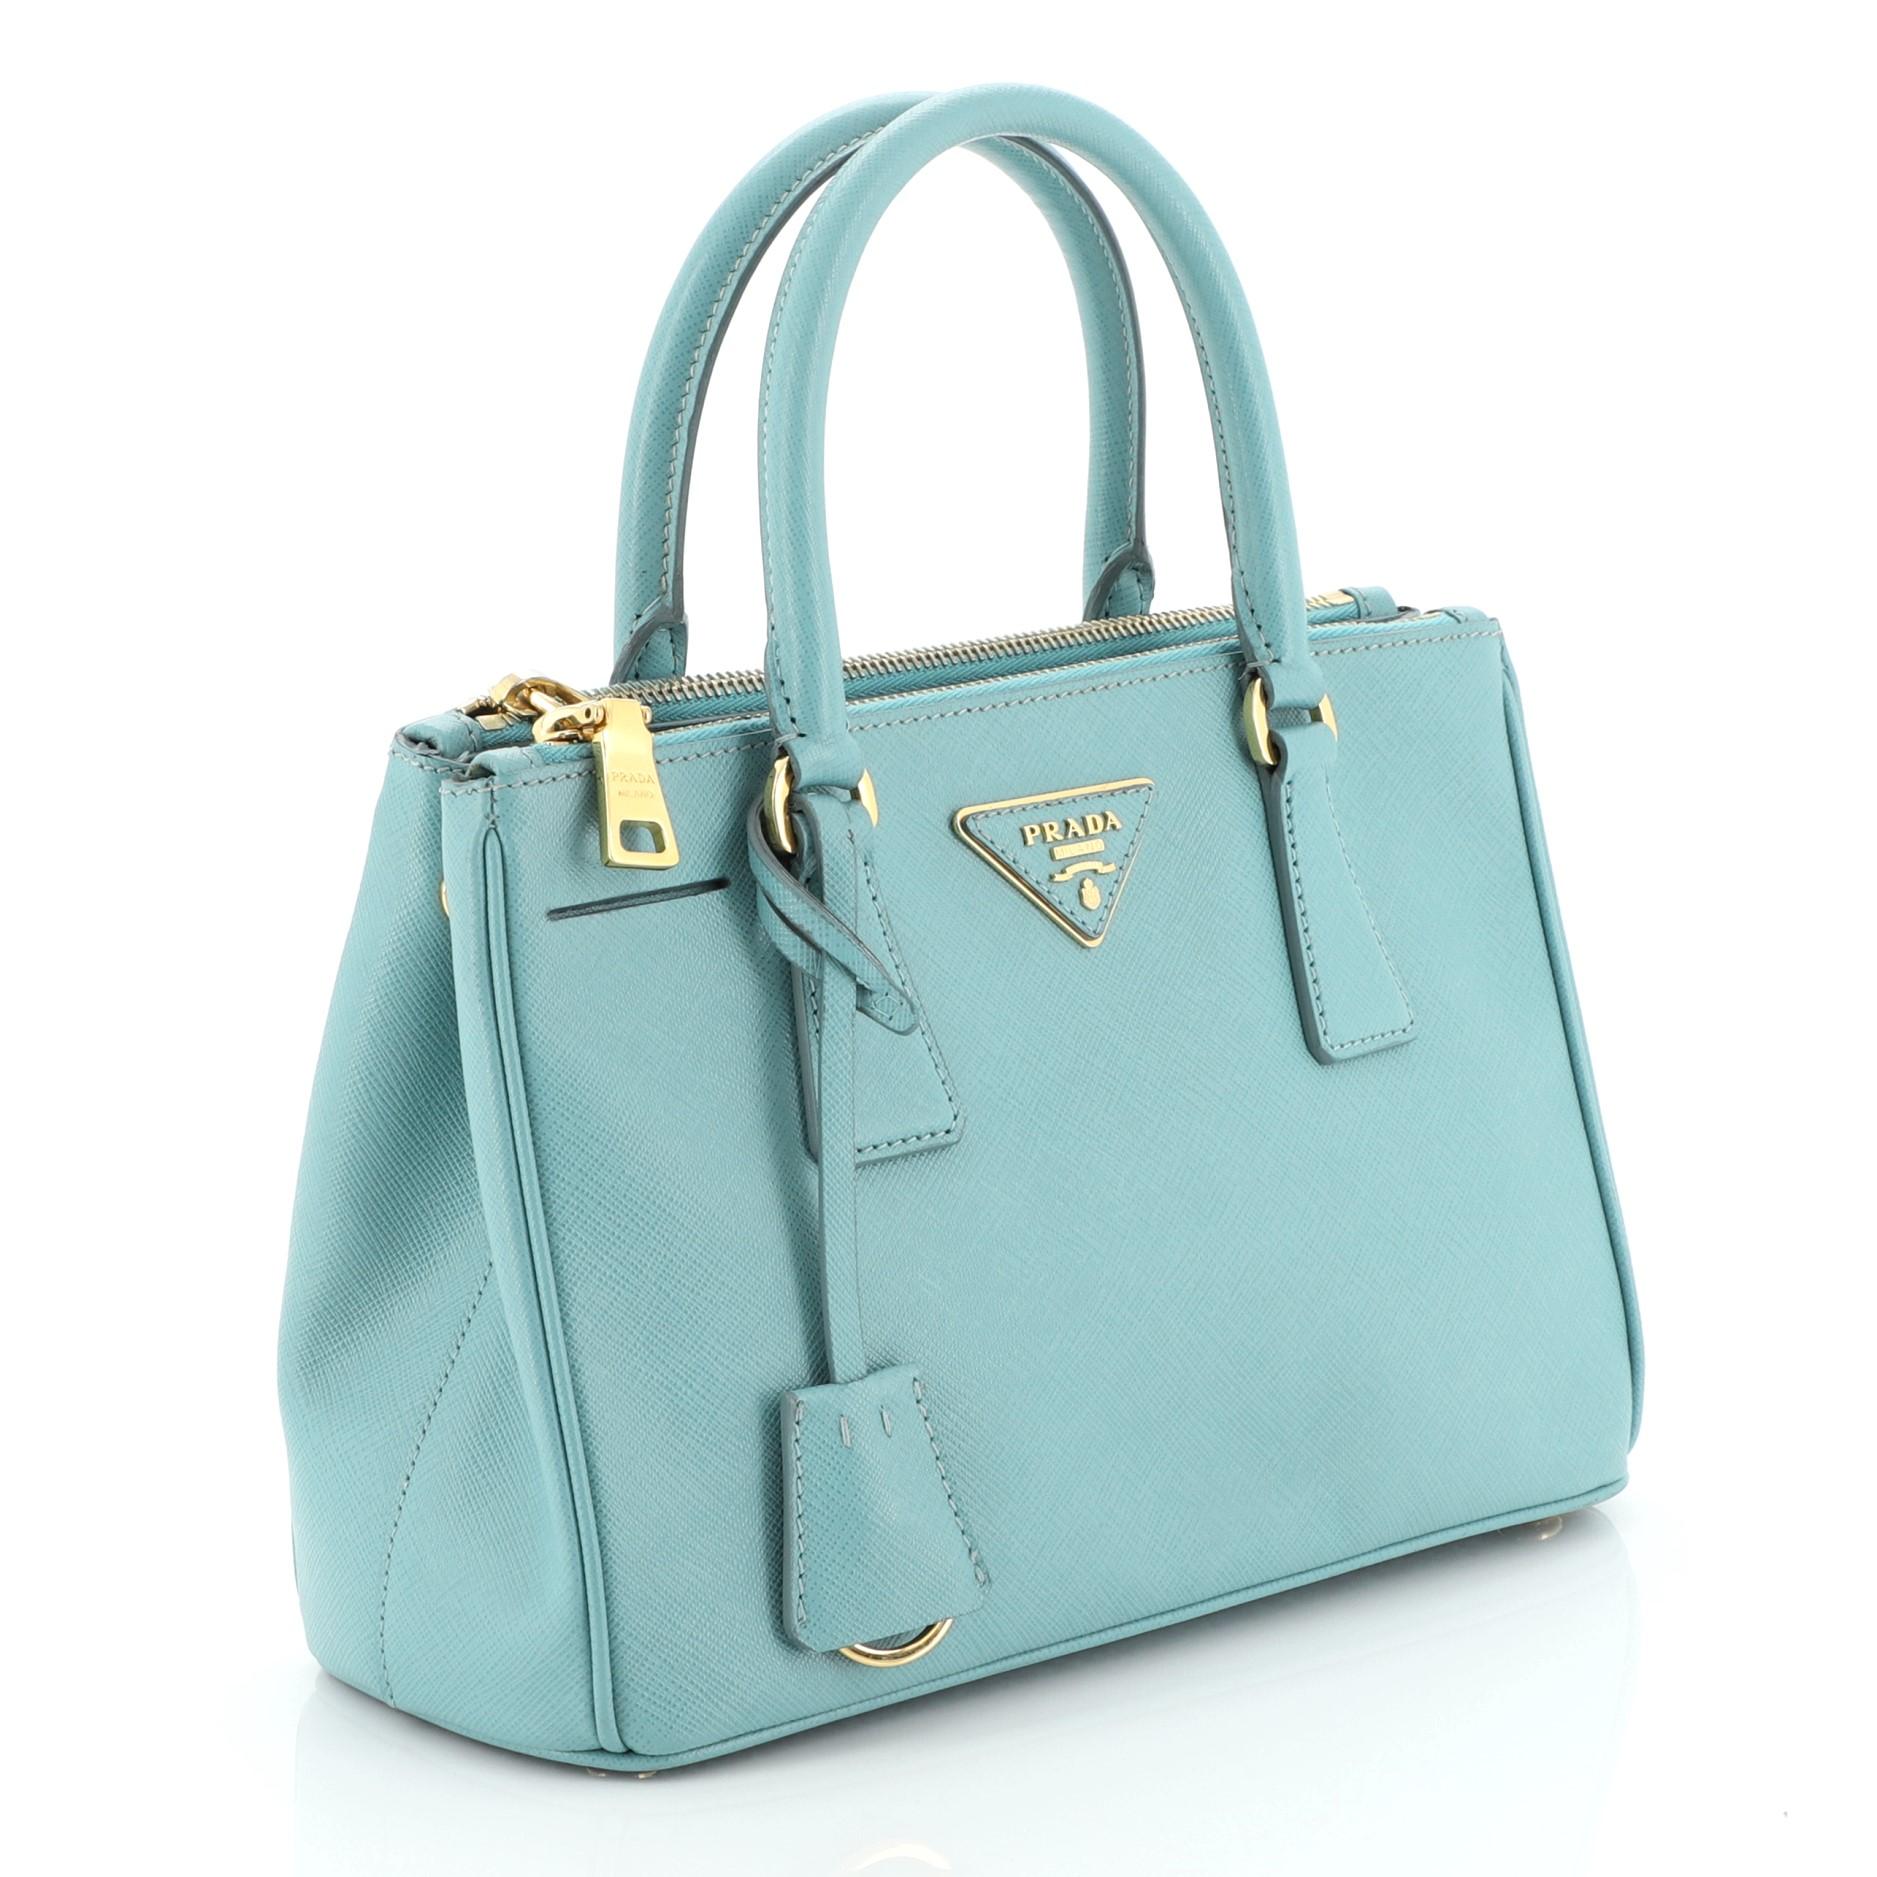 This Prada Double Zip Lux Tote Saffiano Leather Mini, crafted from blue saffiano leather, features dual rolled handles, raised Prada logo plate, and gold-tone hardware. It opens to a blue fabric interior with two zip compartments on both sides and